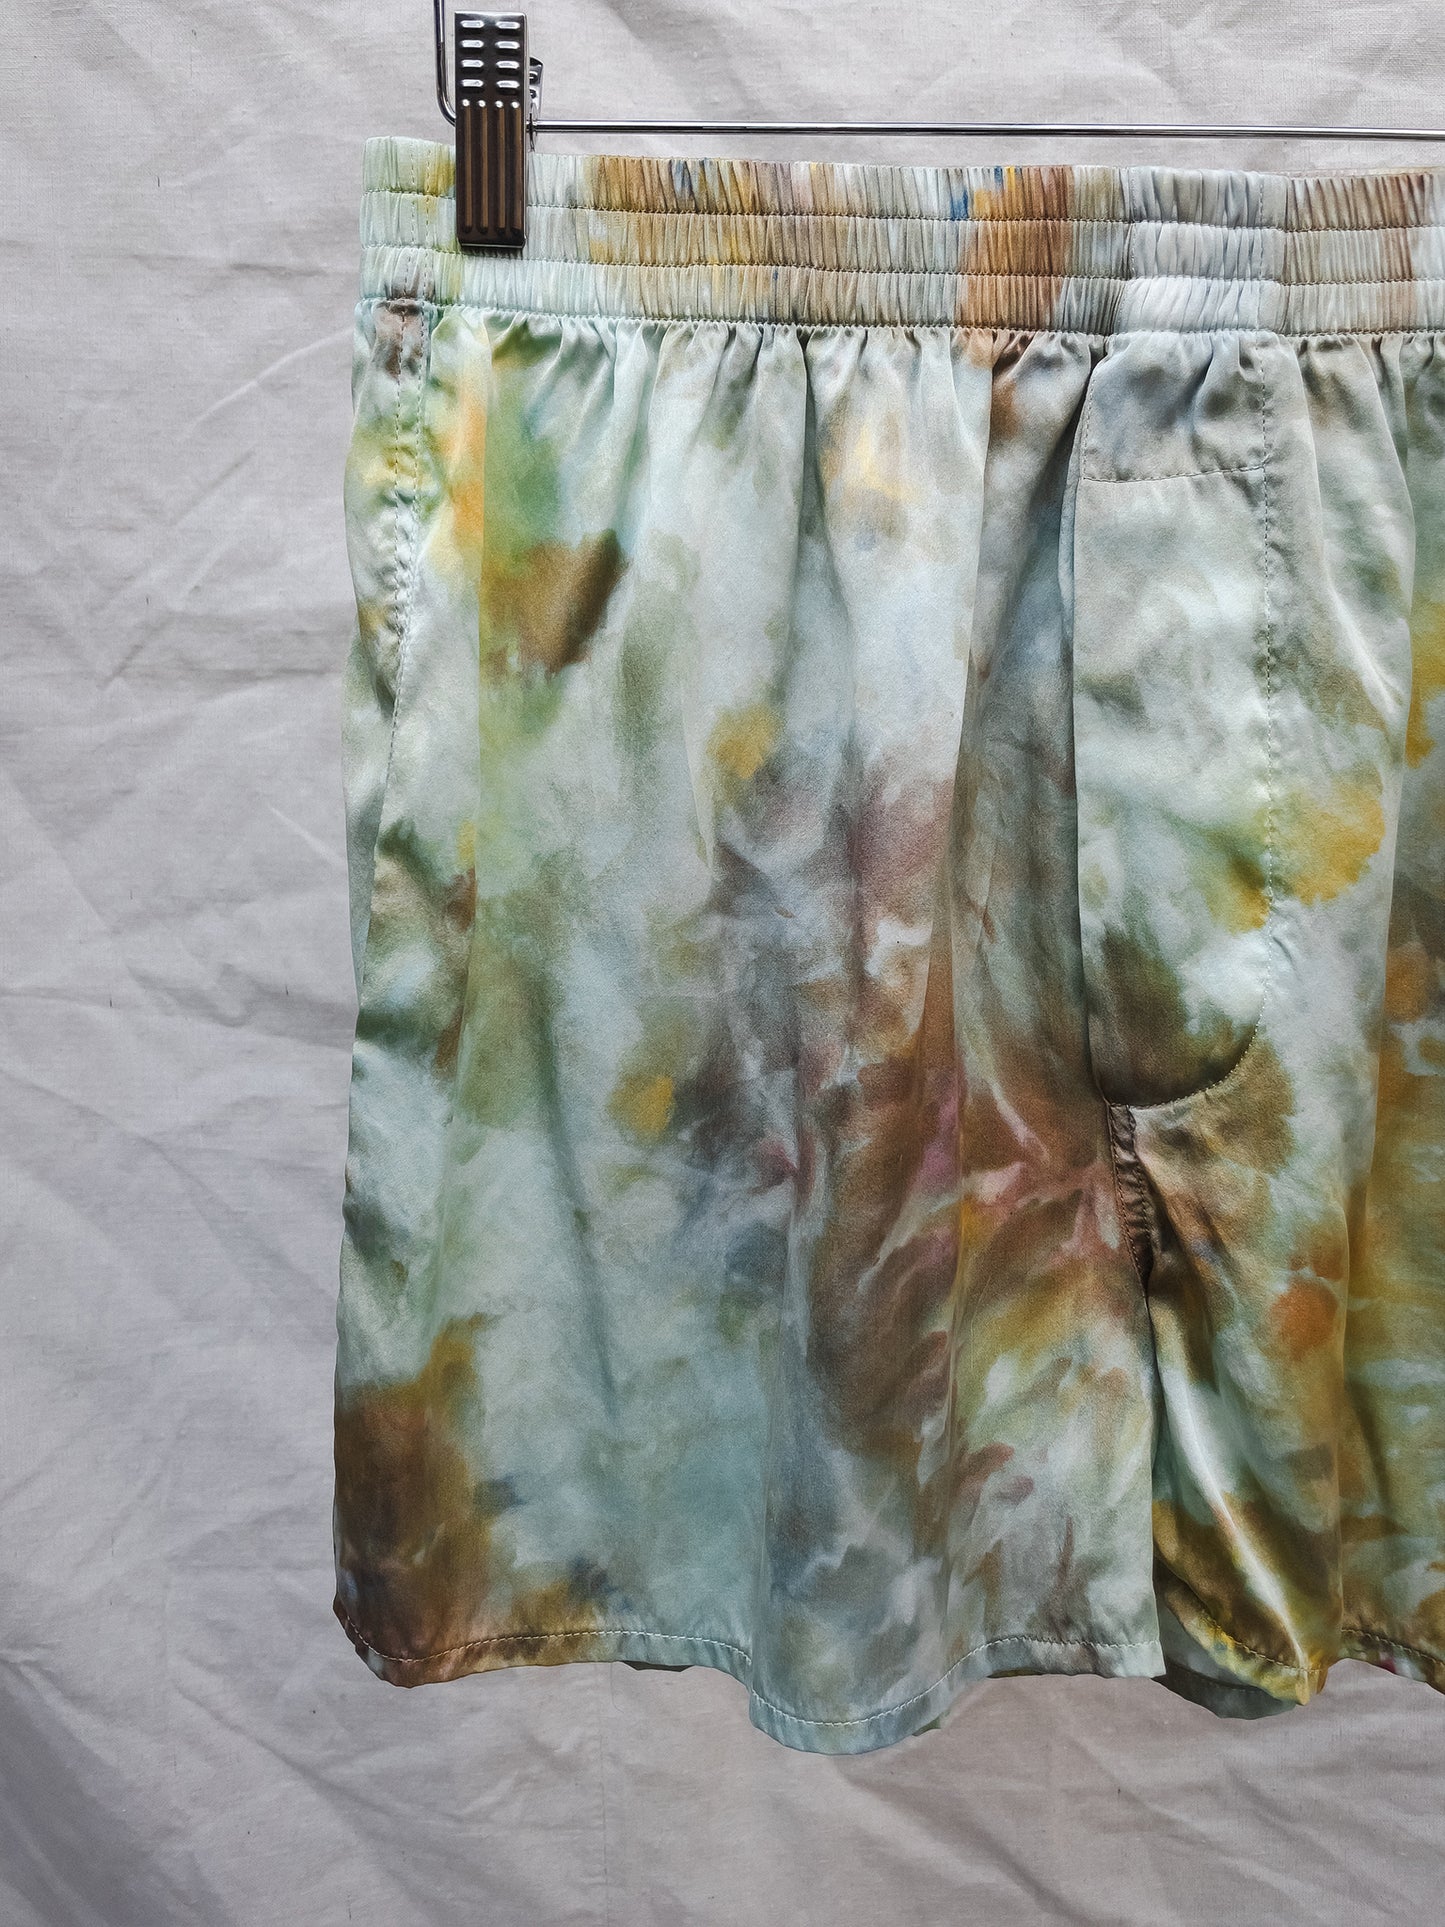 Boxer Short - Hand dyed 100% silk charmeuse